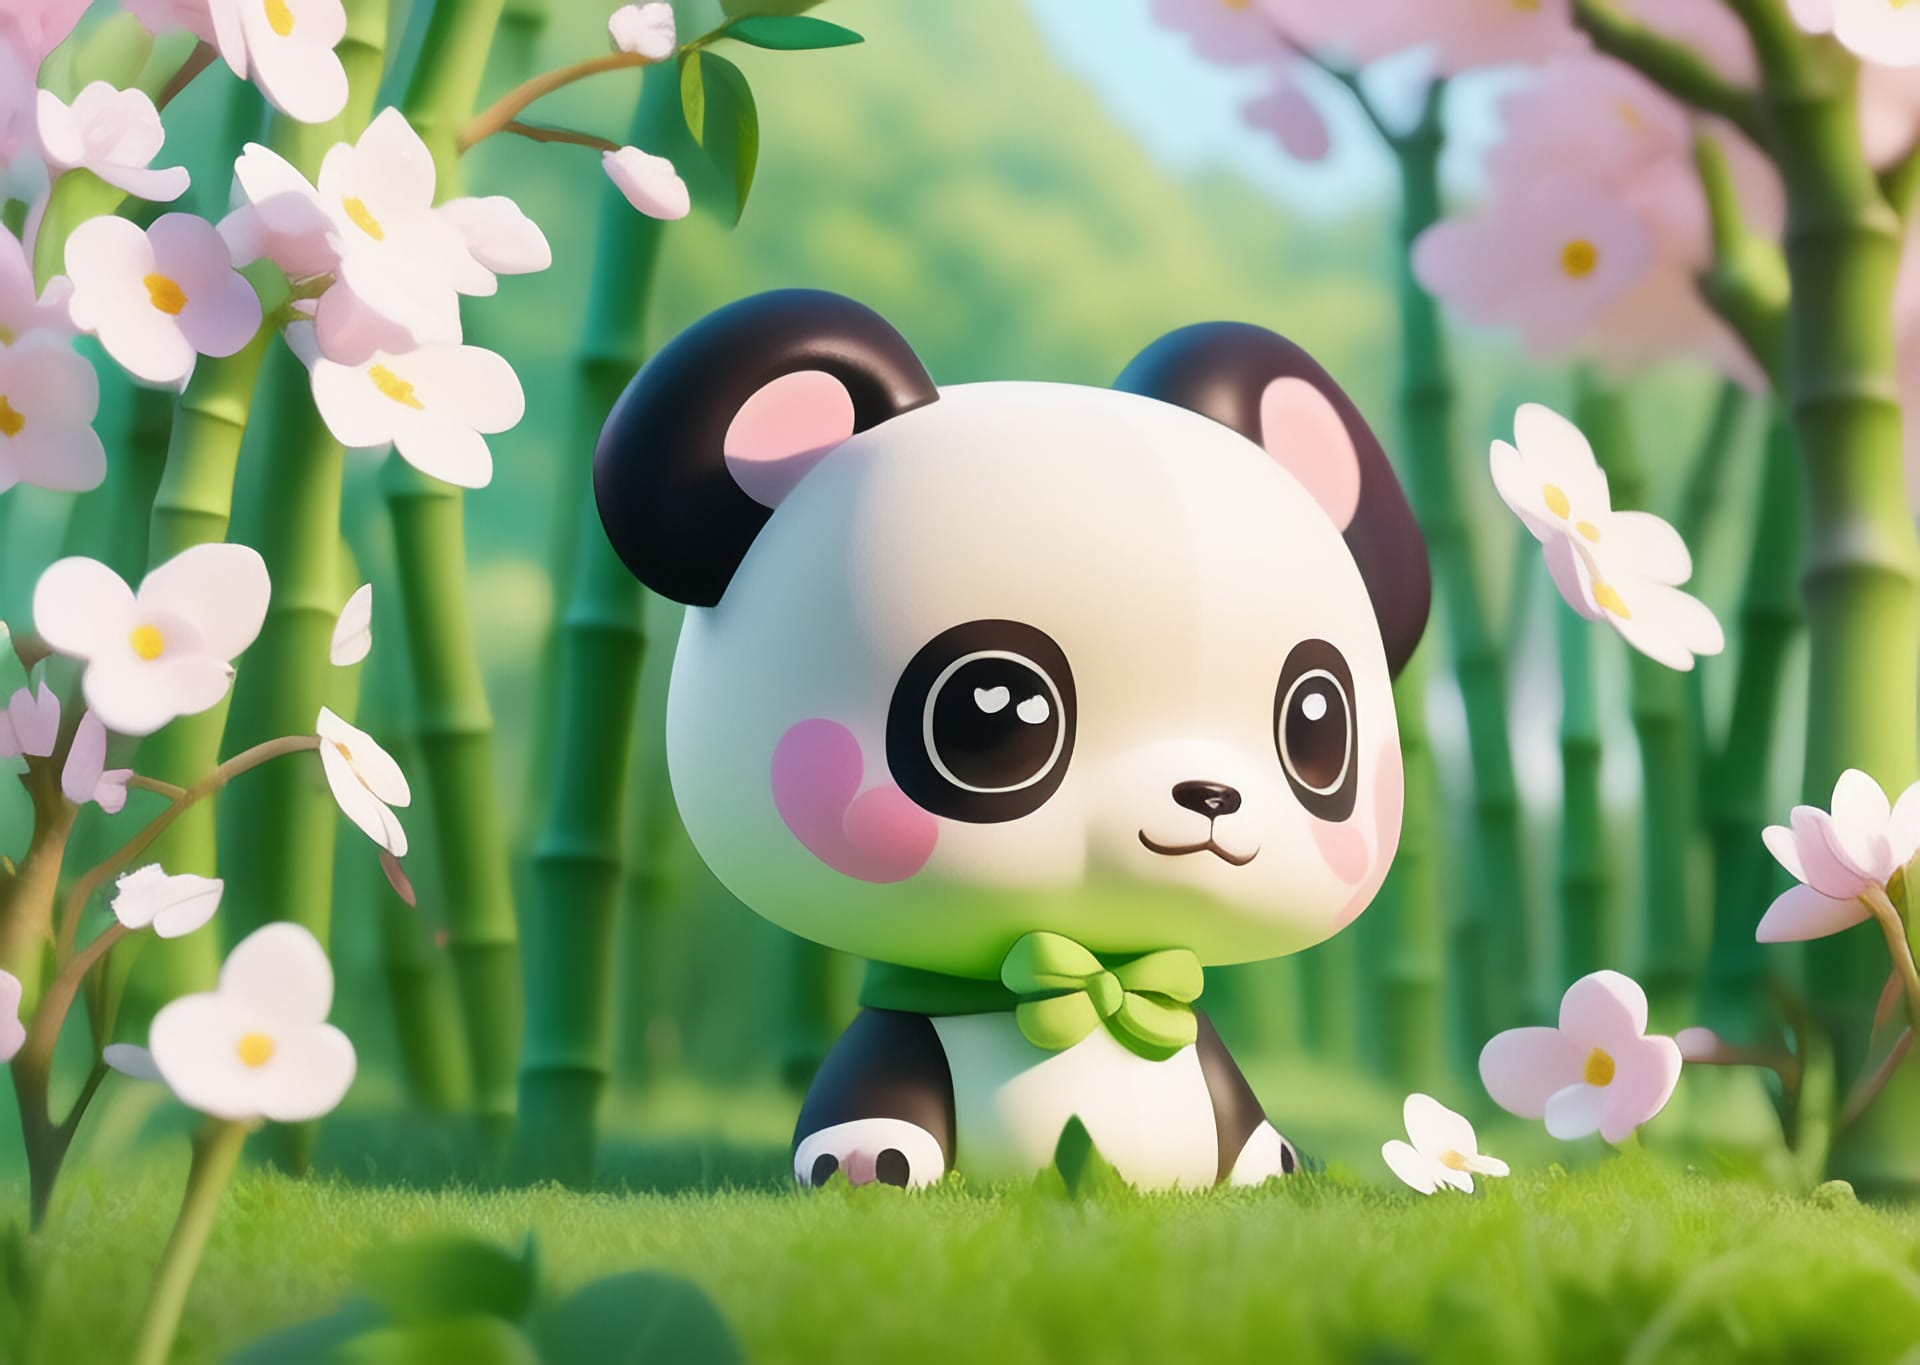 Toy panda sits grass with pink flowers